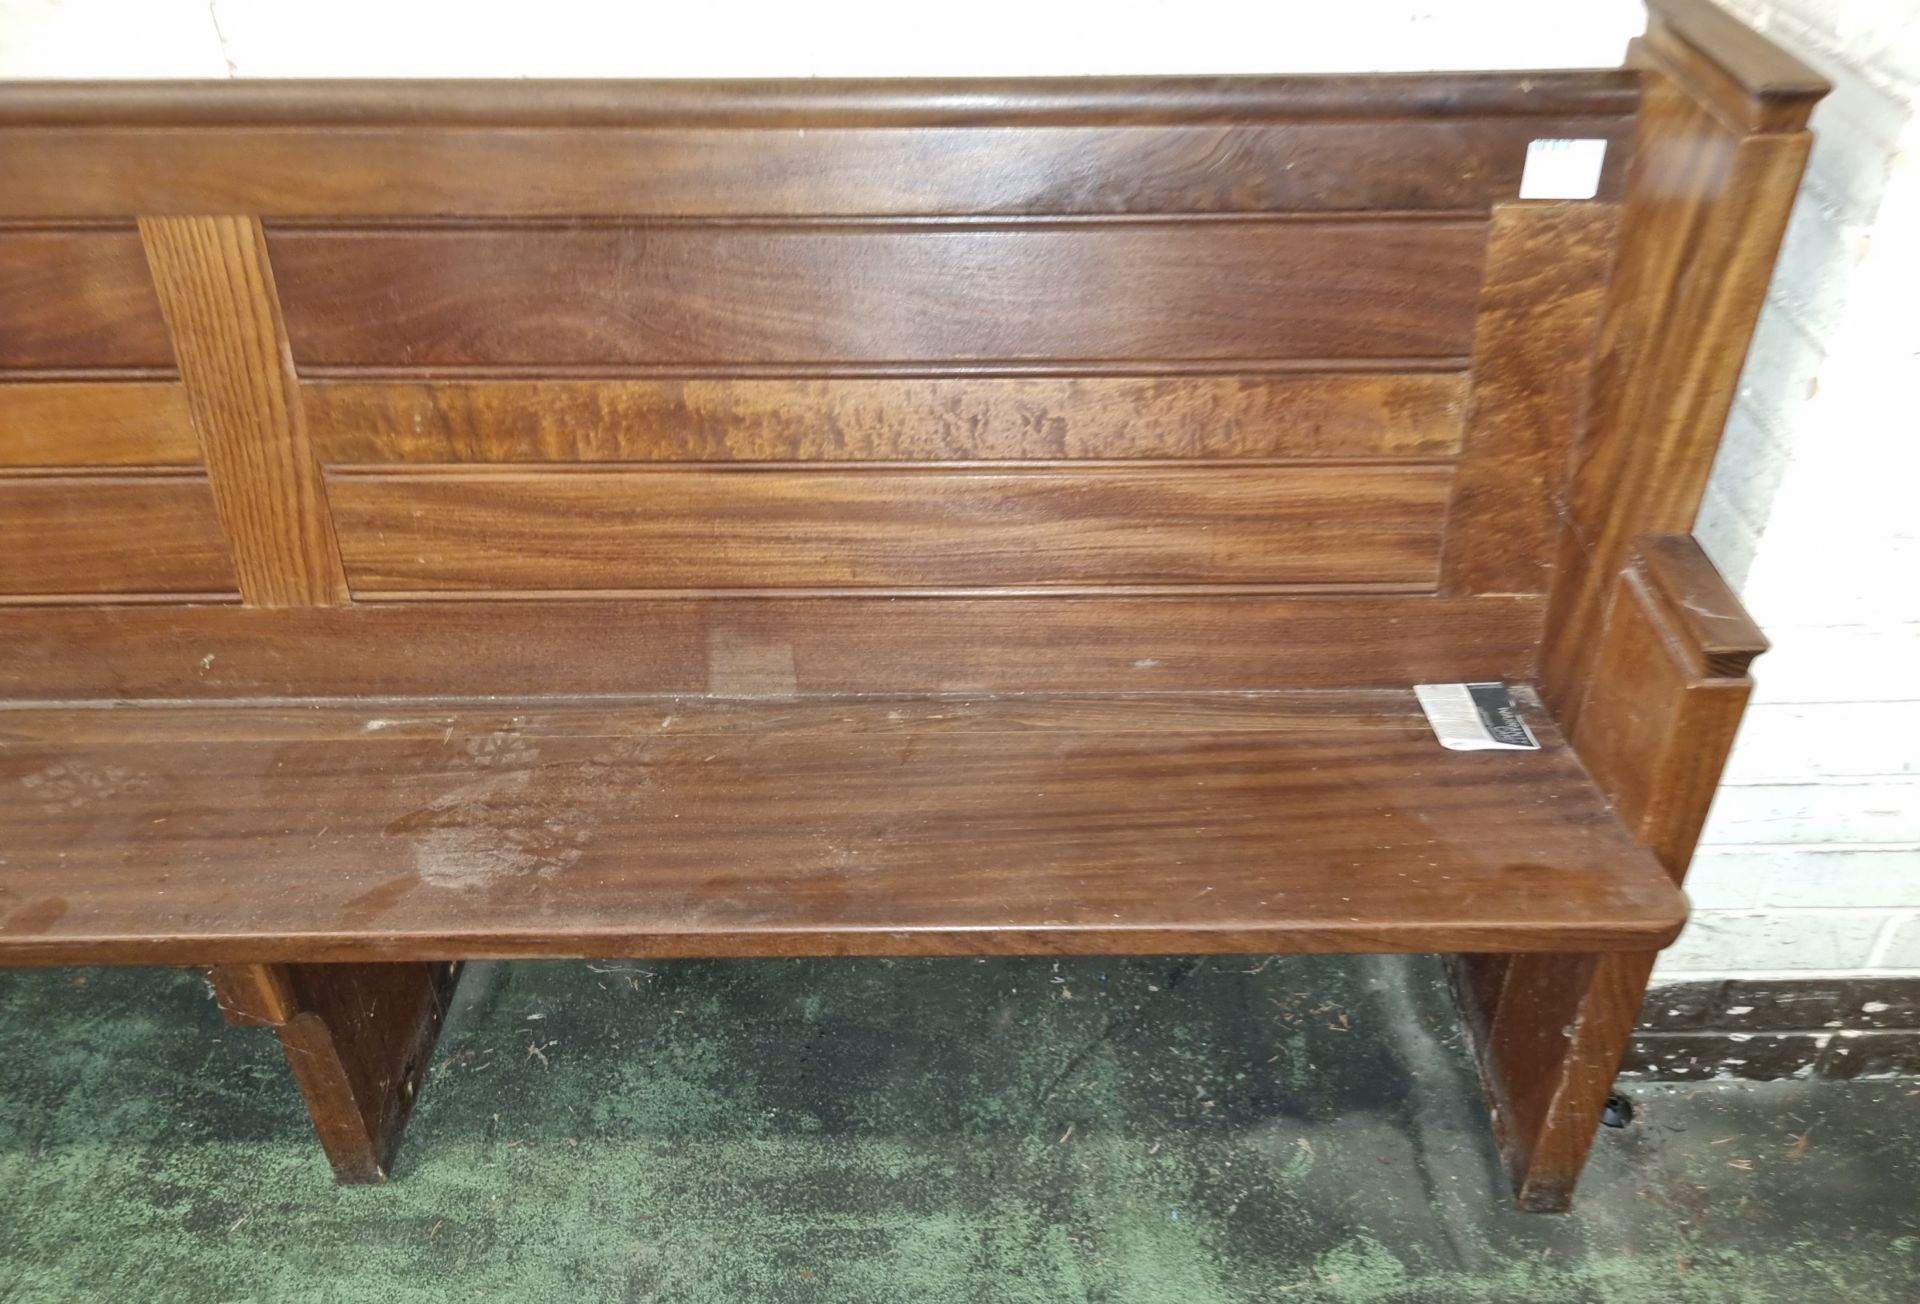 Wooden church pew - L 3570 x W 450 x H 900mm - Image 4 of 6